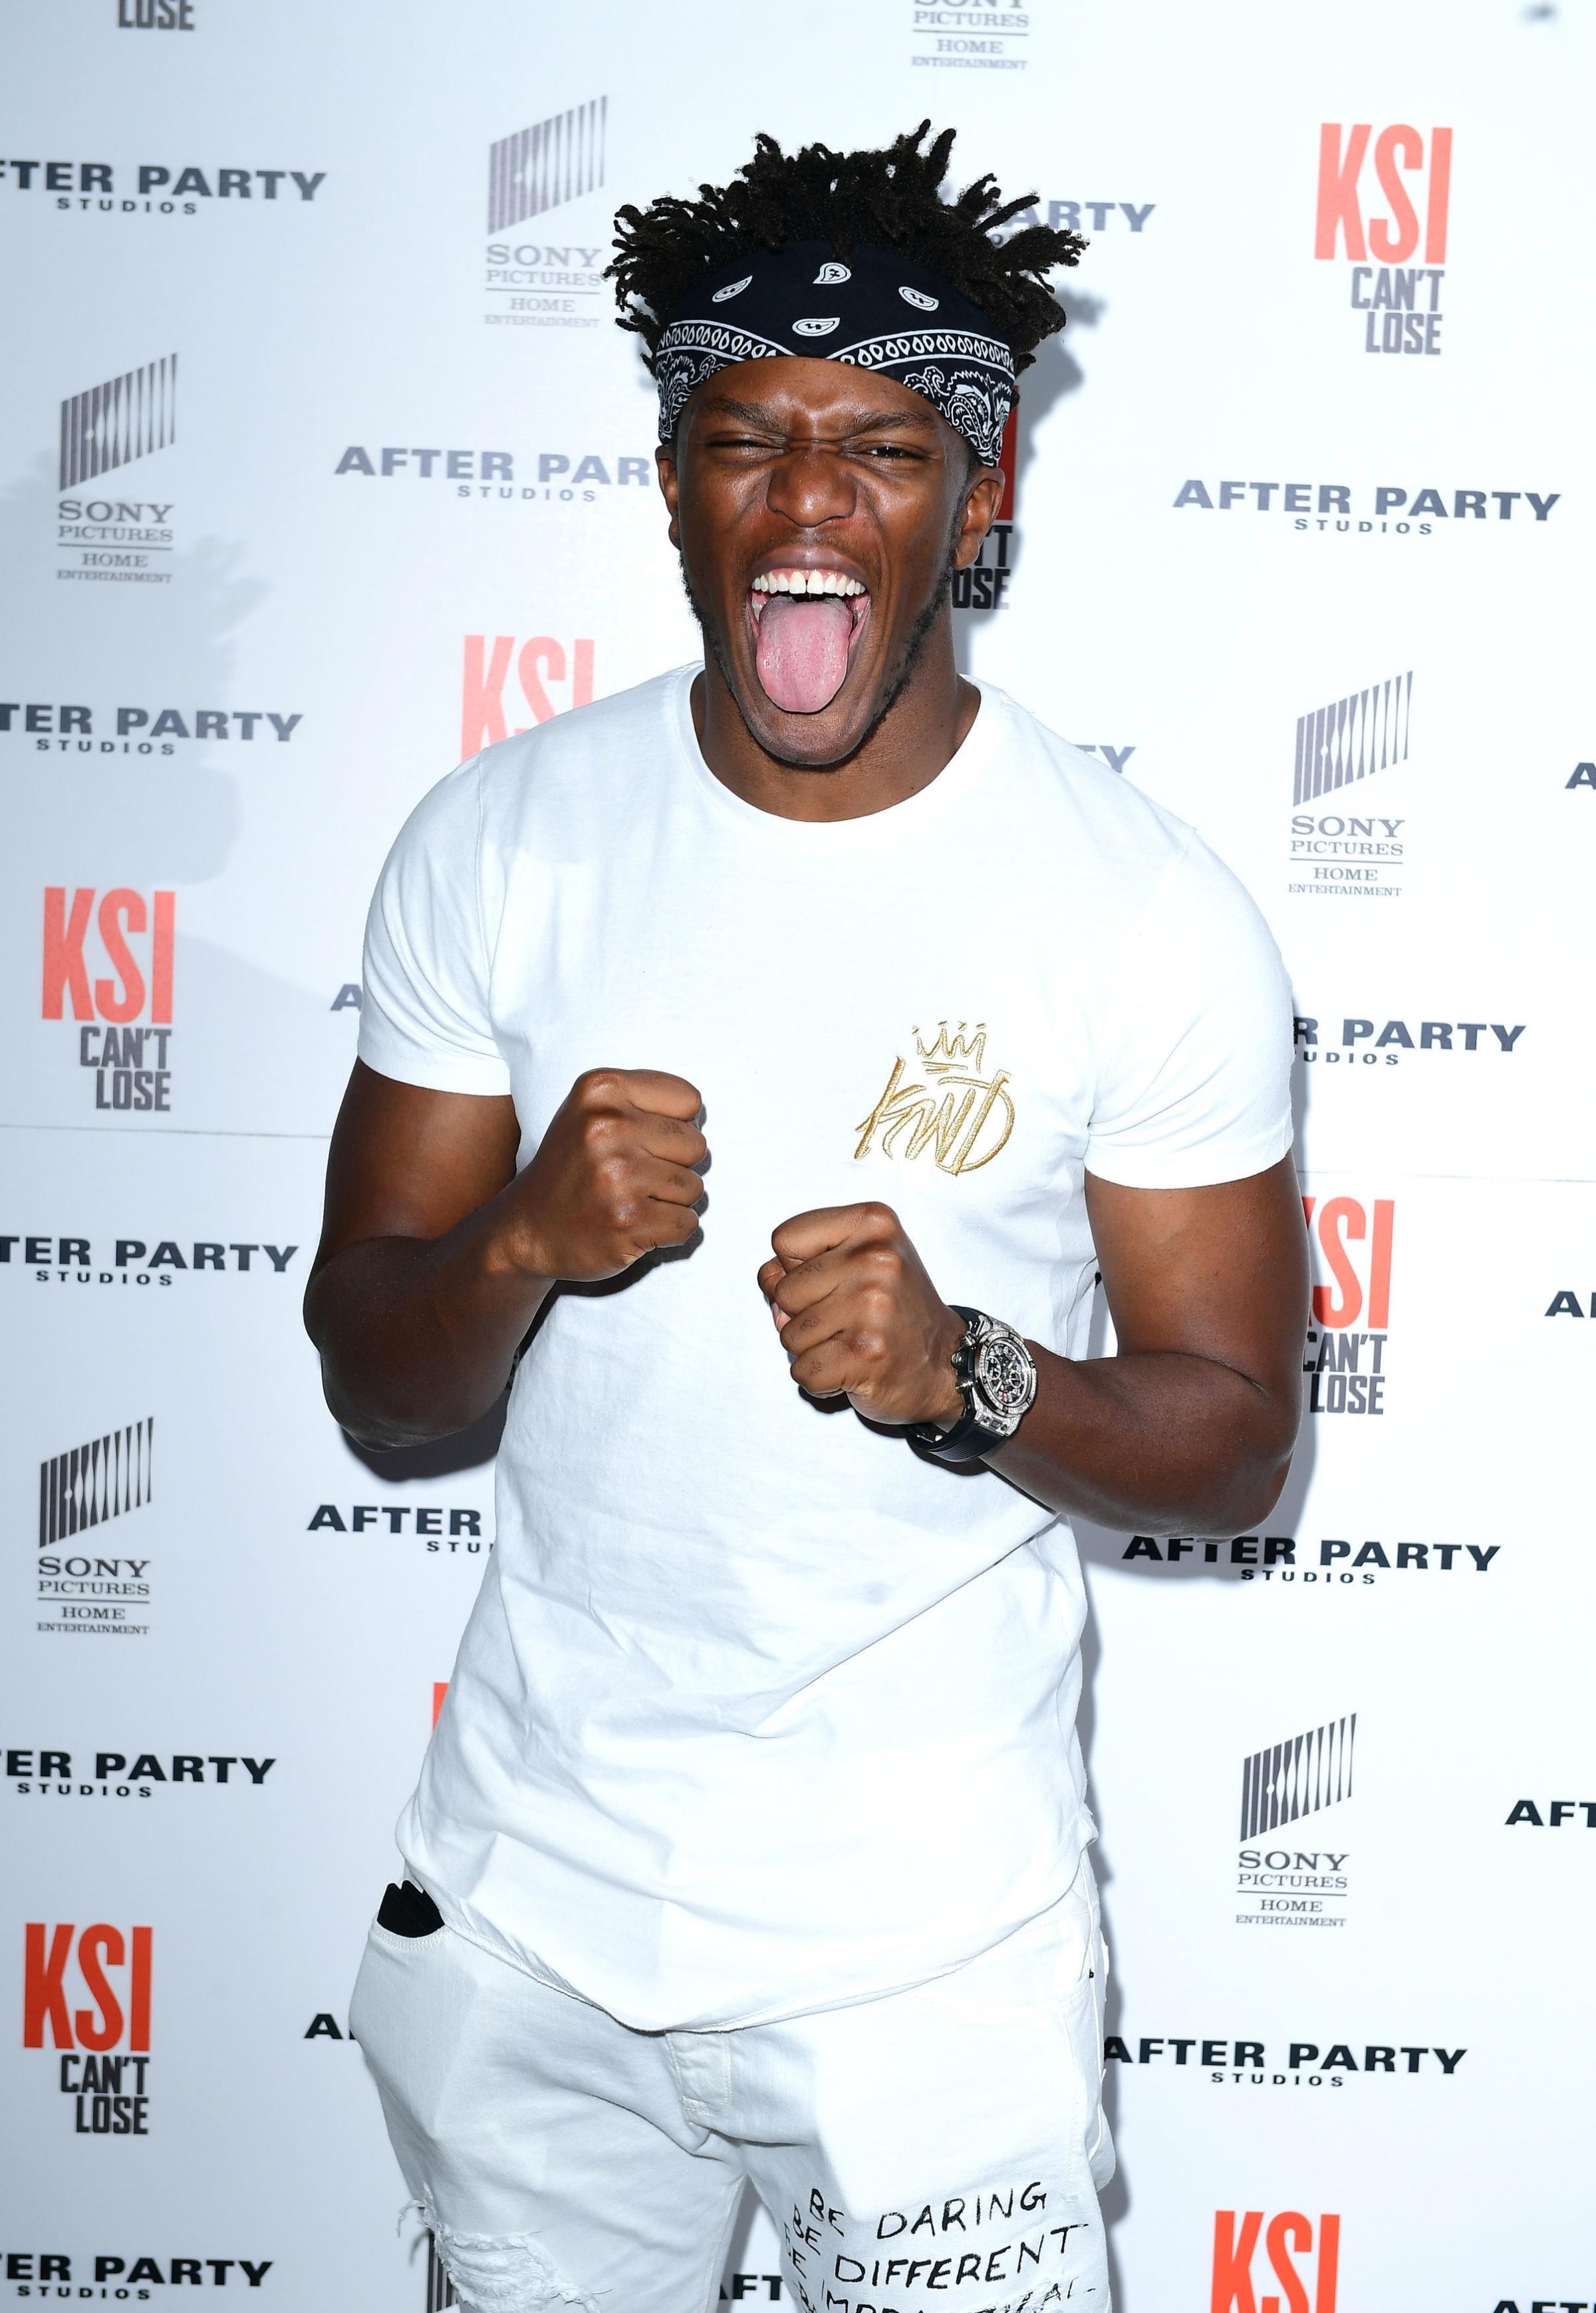 KSI at the world premiere of his documentary KSI:Cant Lose at the Picturehouse in central London on Wednesday August 8, 2018. Photo: Ian West/PA Wire.